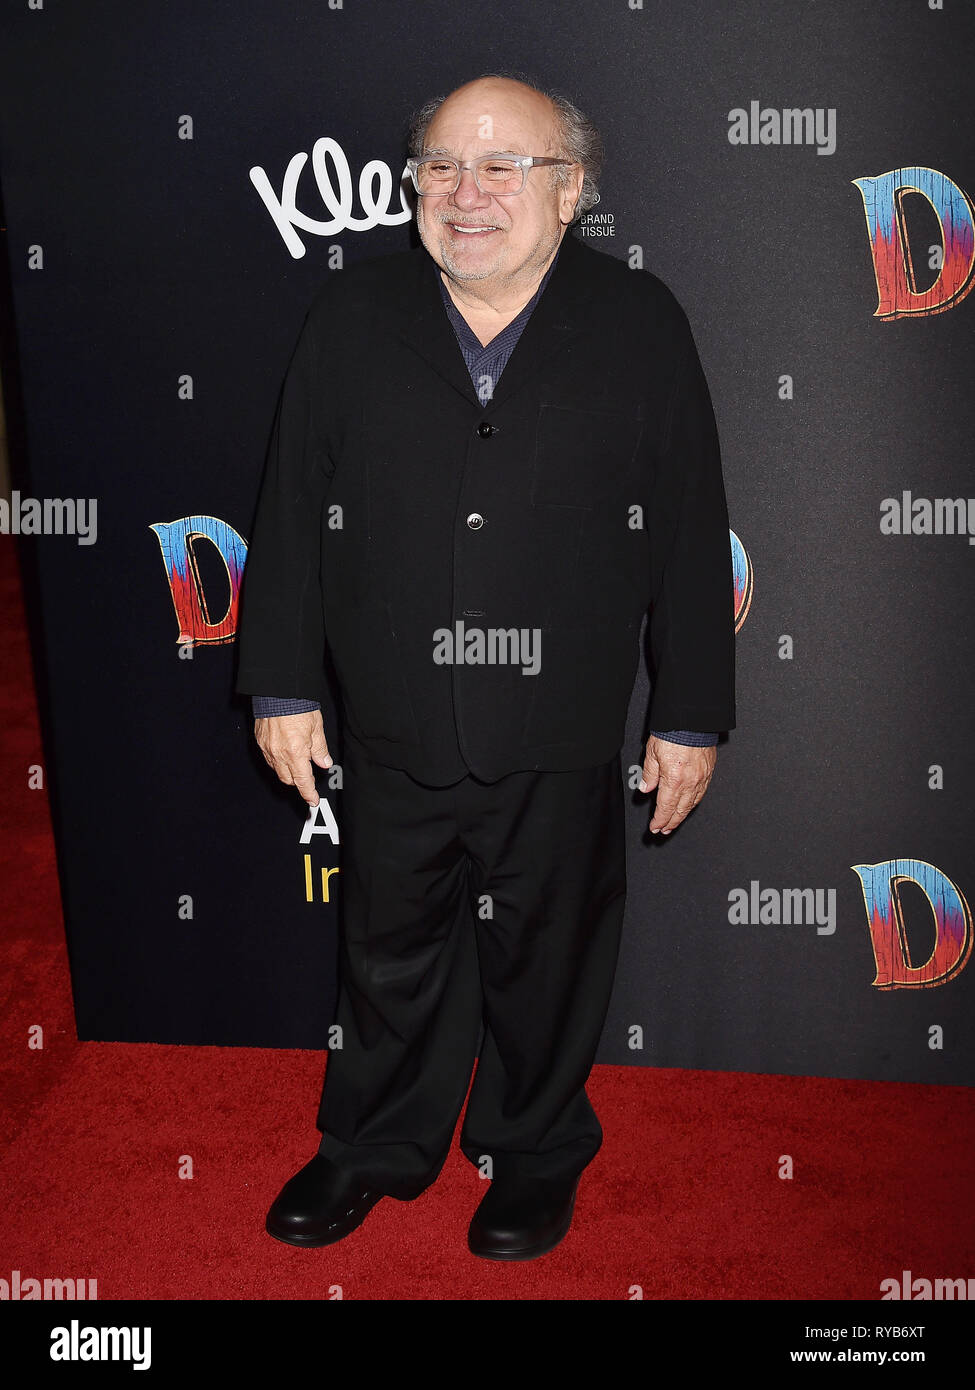 HOLLYWOOD, CA - MARCH 11: Danny DeVito attends the premiere of Disney's 'Dumbo' at El Capitan Theatre on March 11, 2019 in Los Angeles, California. Stock Photo